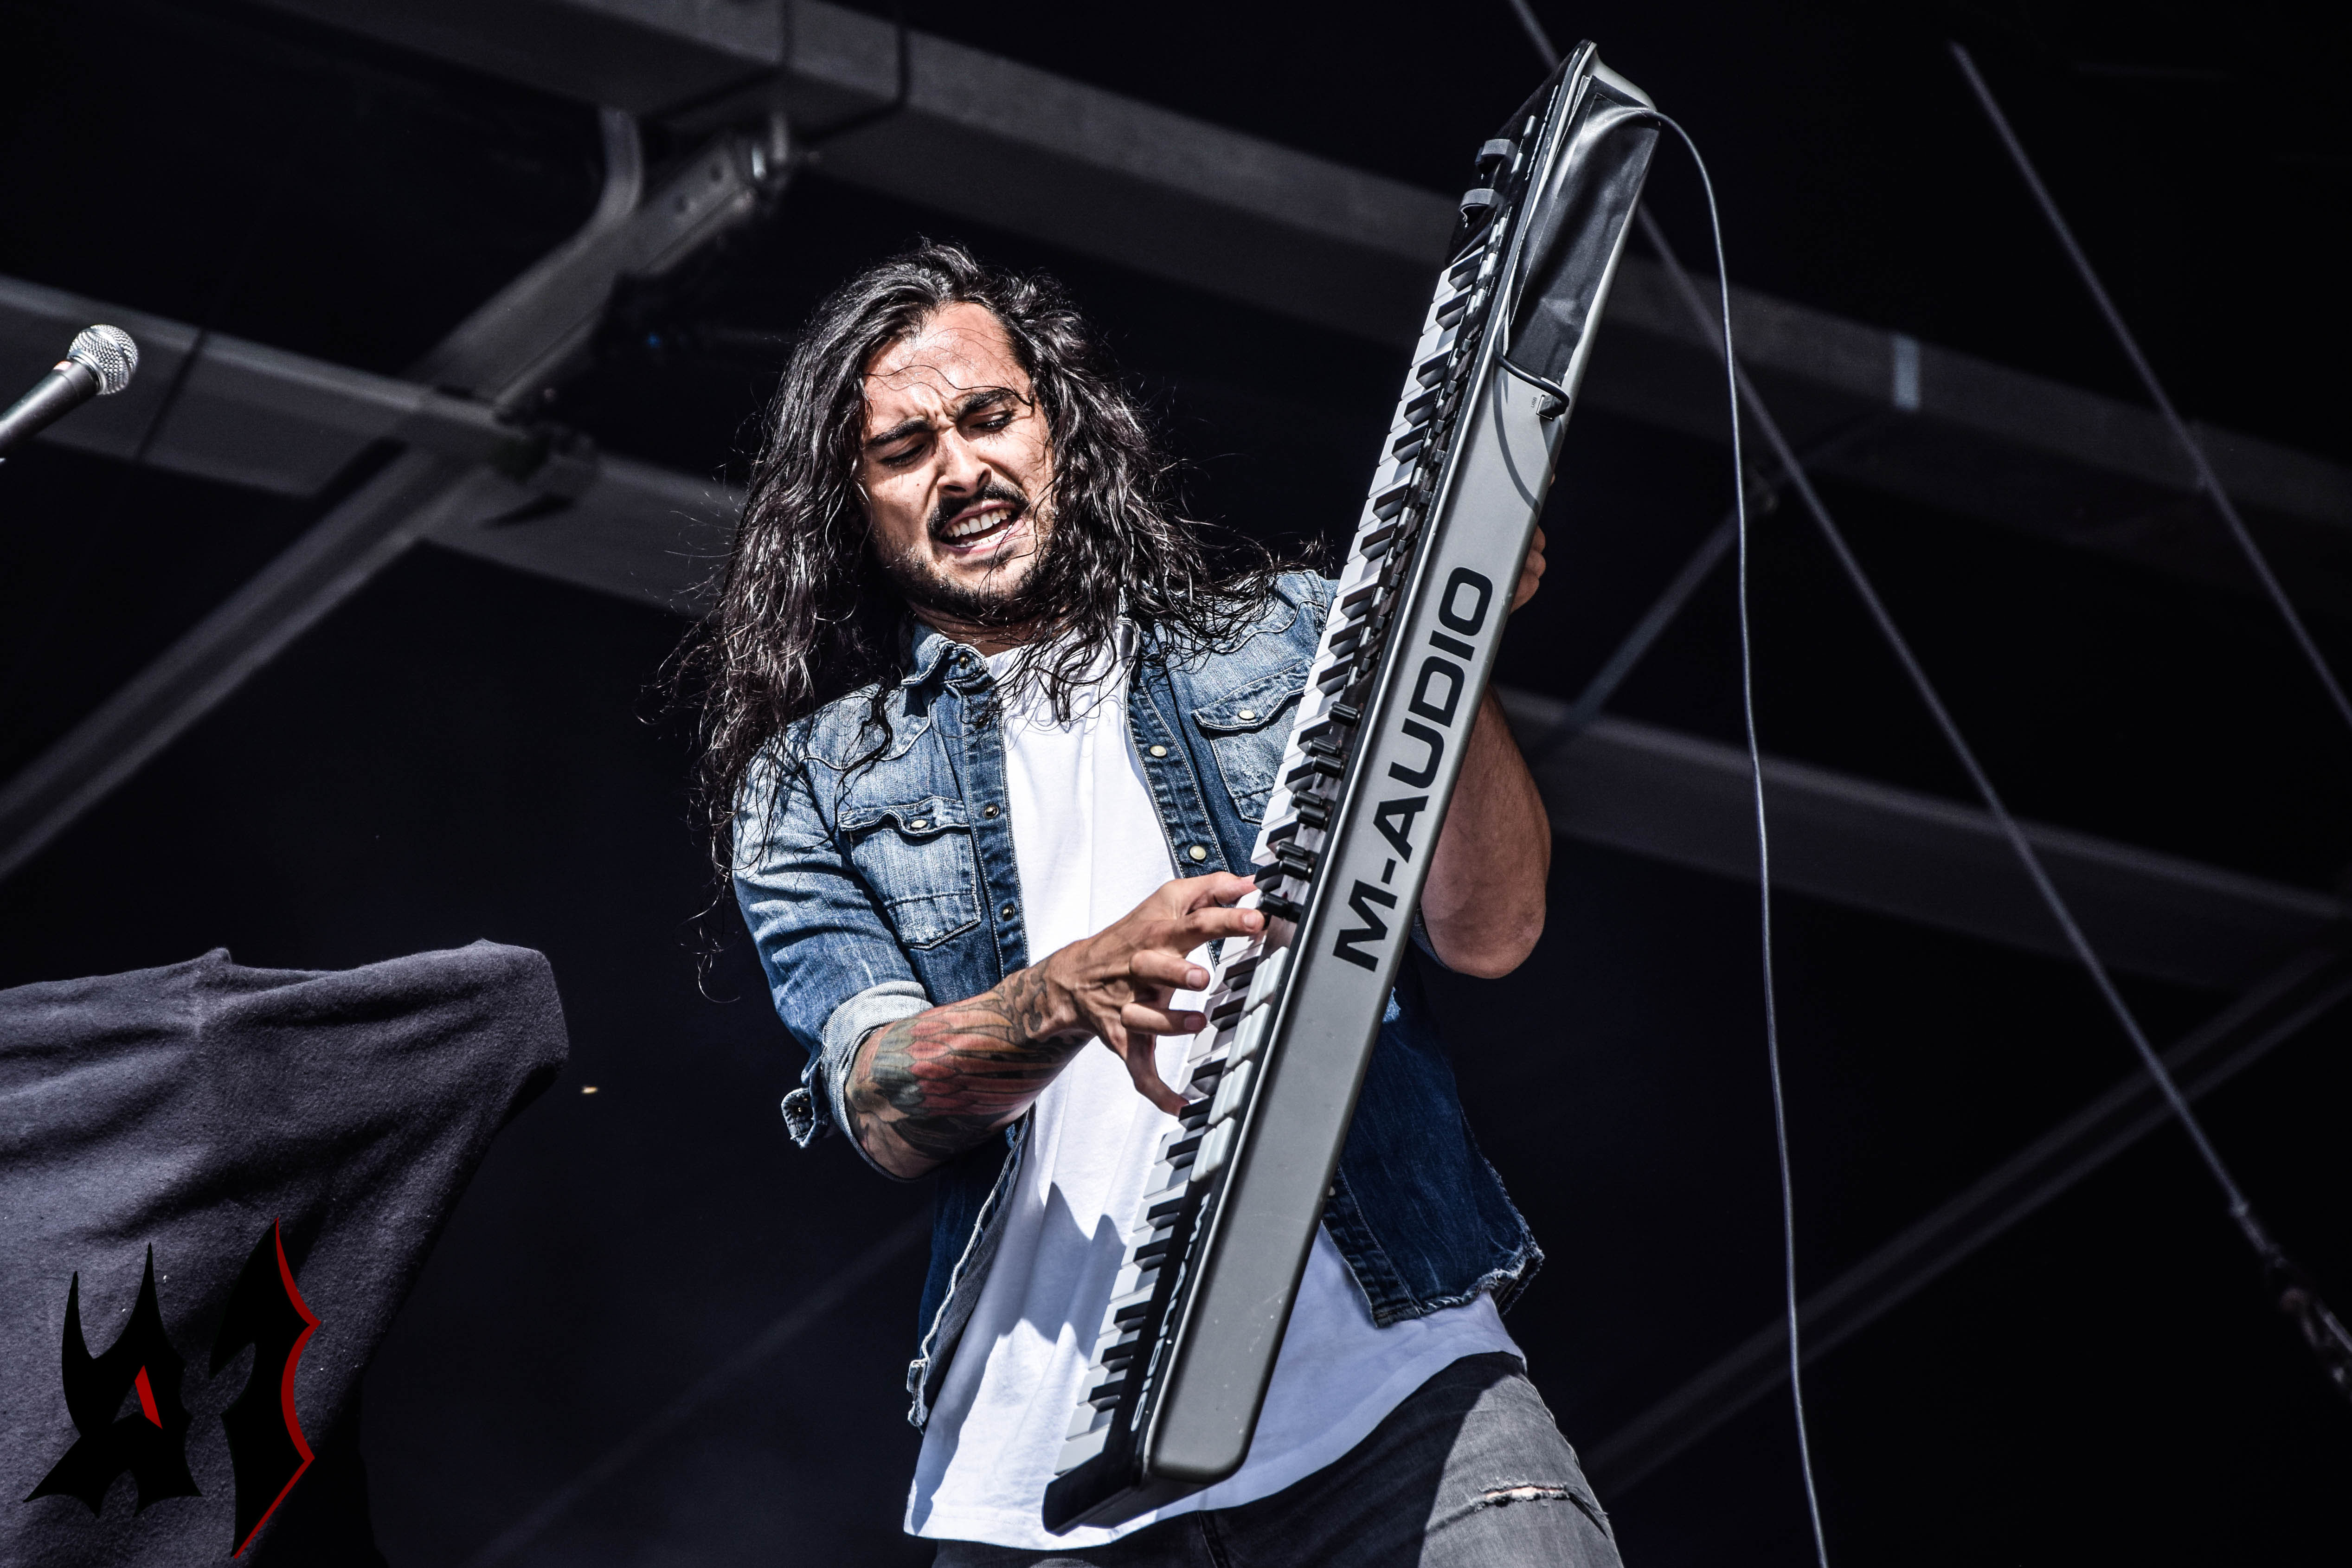 Donwload 2018 – Day 2 - Betraying The Martyrs 10